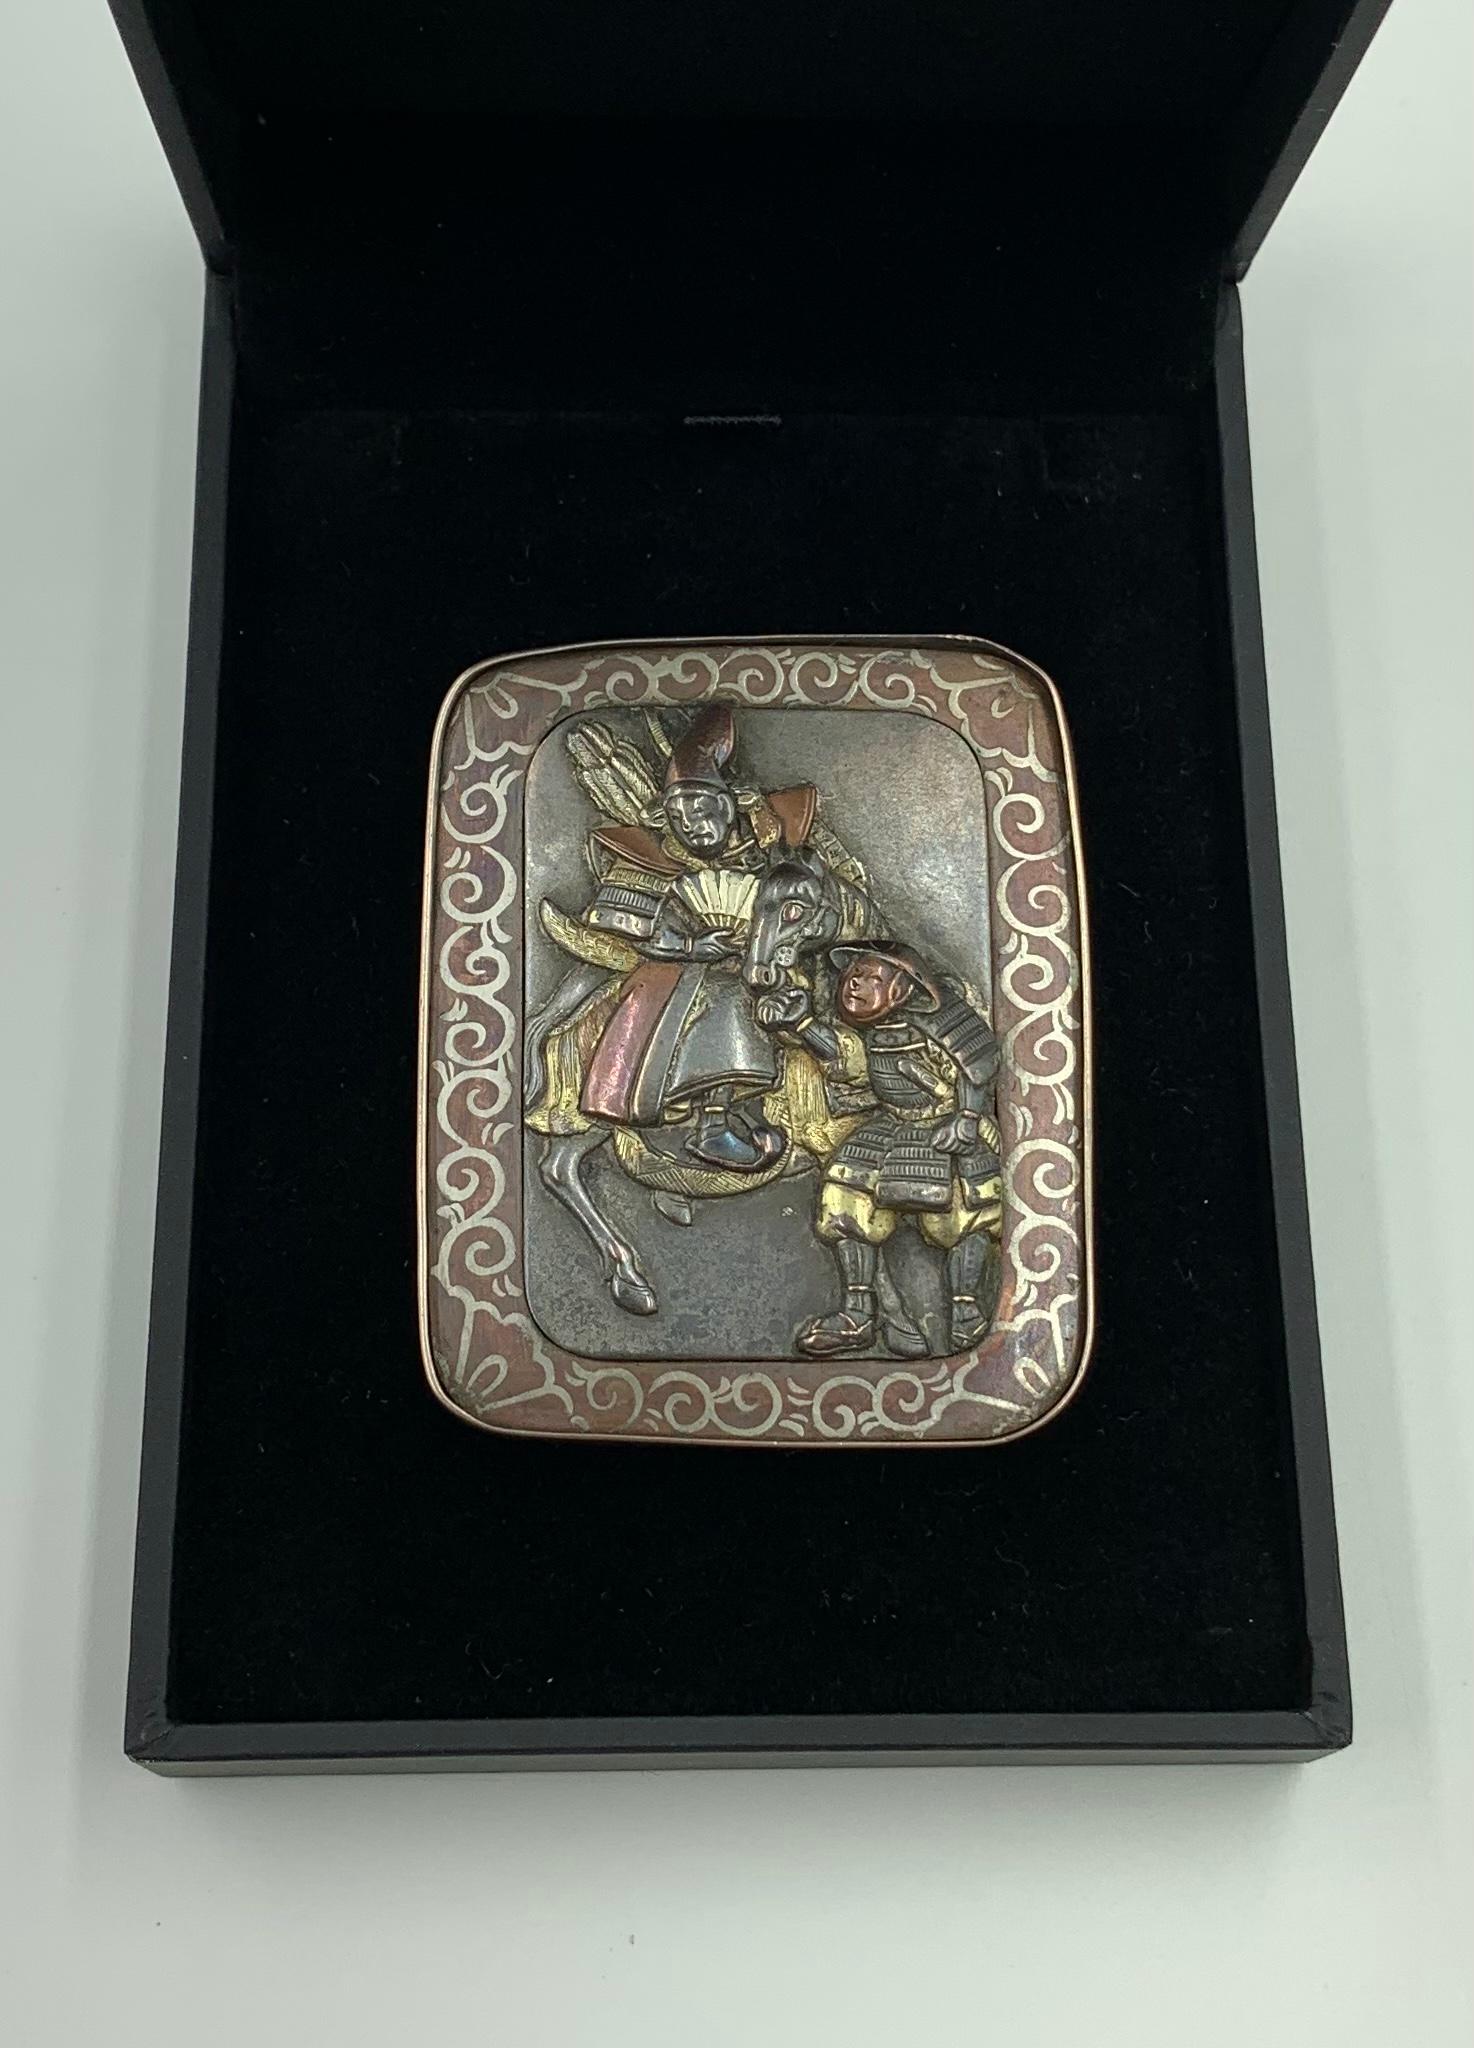 Fine antique beautifully detailed Japanese Shakudo brooch of a Samurai warrior on a horse being held by a groom. Intricately detailed, the Samurai is depicted in full regalia and holding a fan in his right hand, his right foot in an ornate stirrup